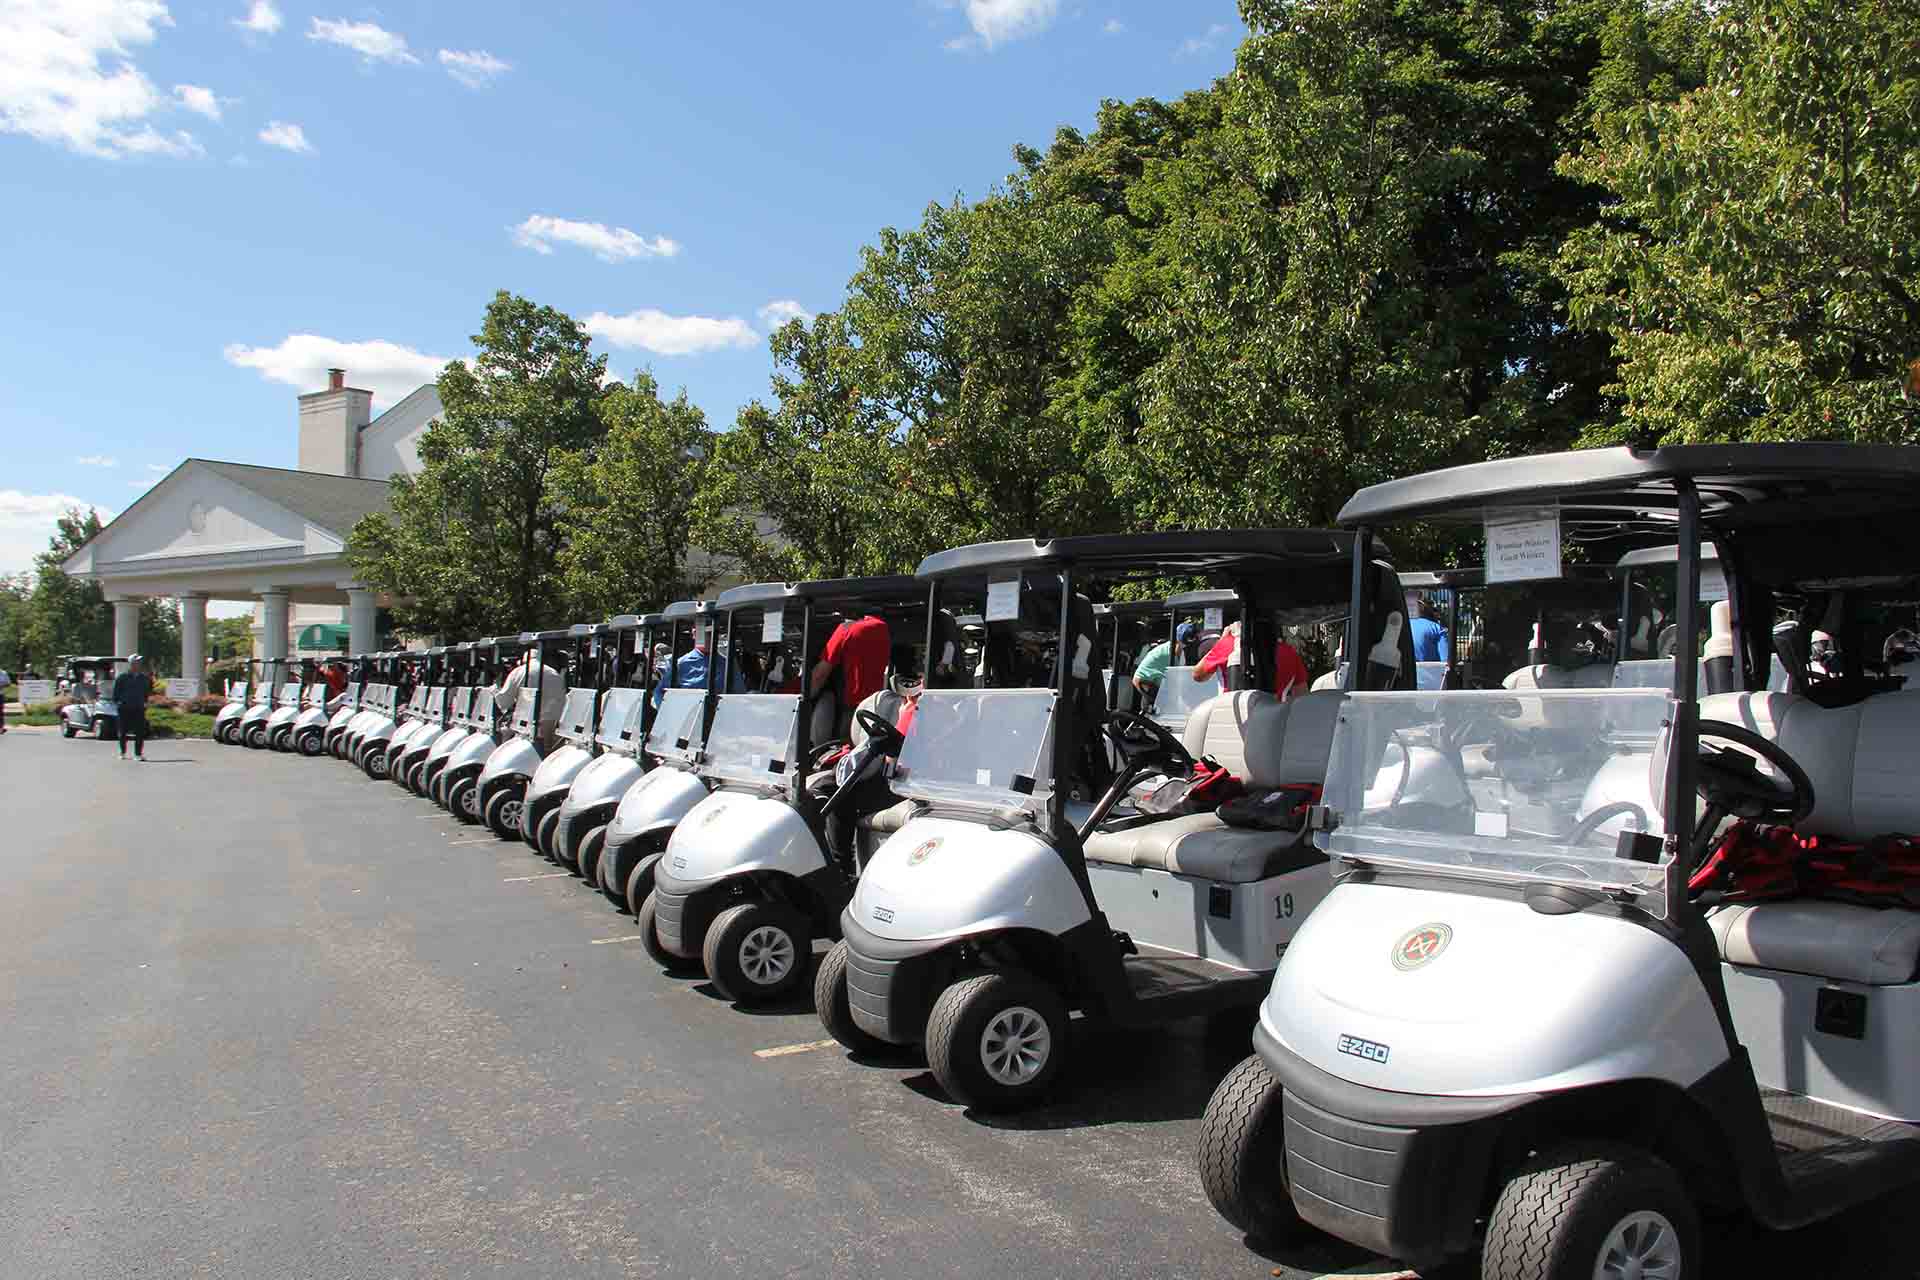 2022-Endowment-Golf-Classic-line-of-golf-carts-and-people